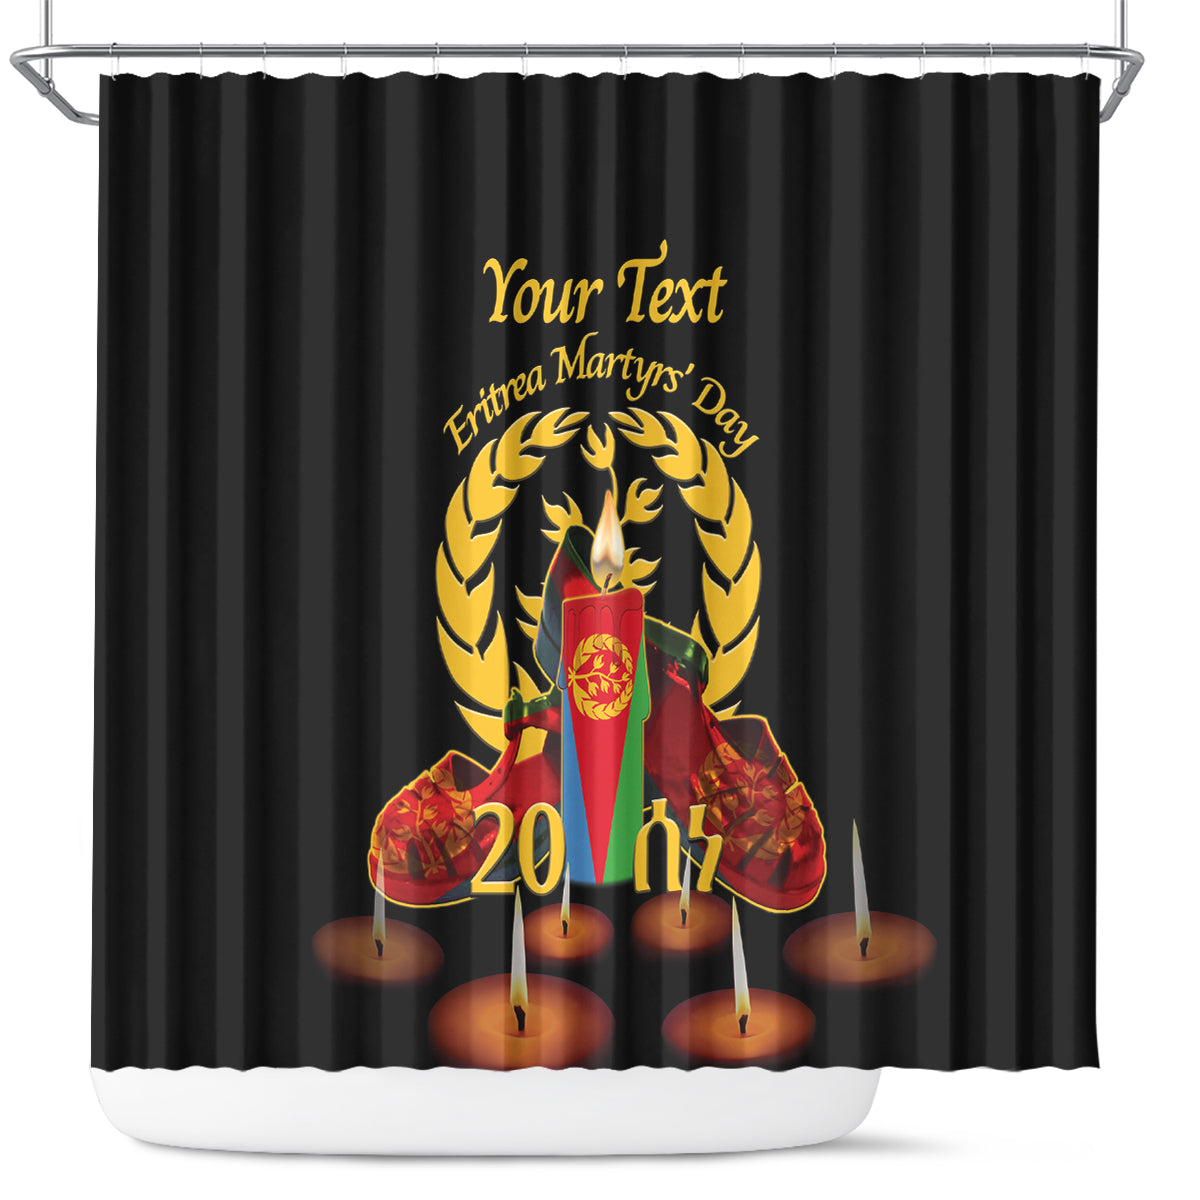 Custom Eritrea Martyrs' Day Shower Curtain 20 June Shida Shoes With Candles - Black